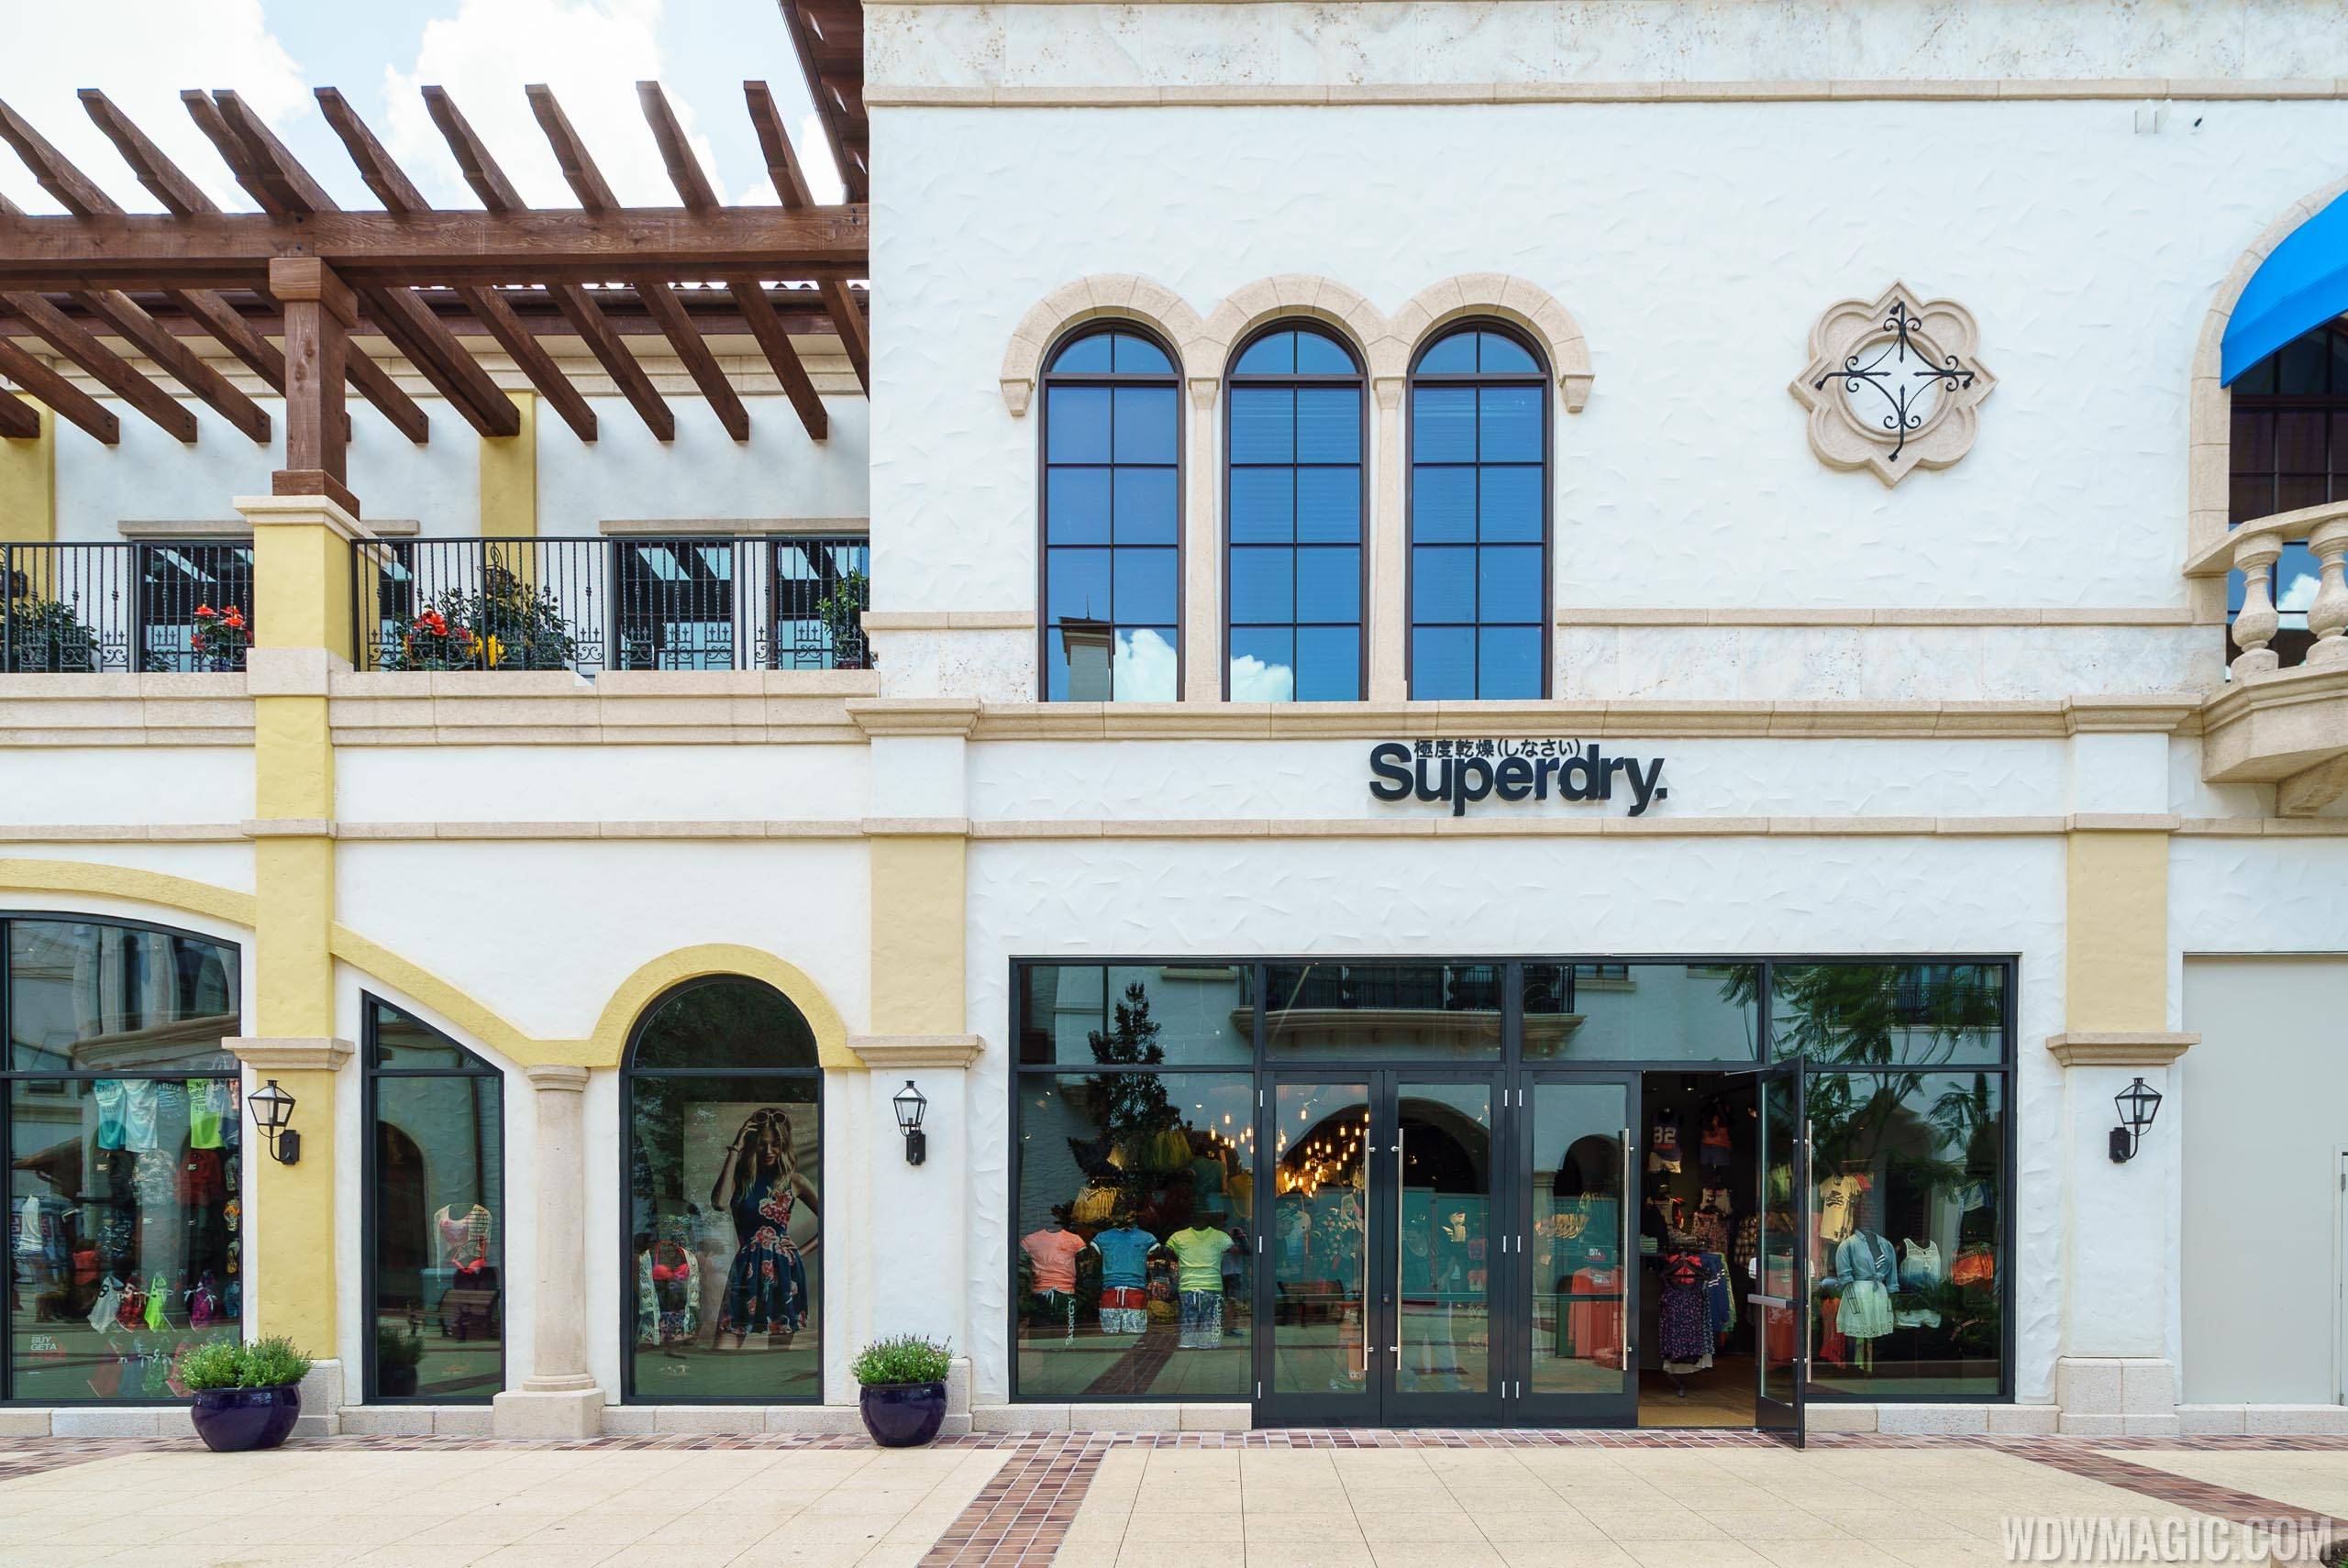 PHOTOS - Superdry now open at Disney Springs